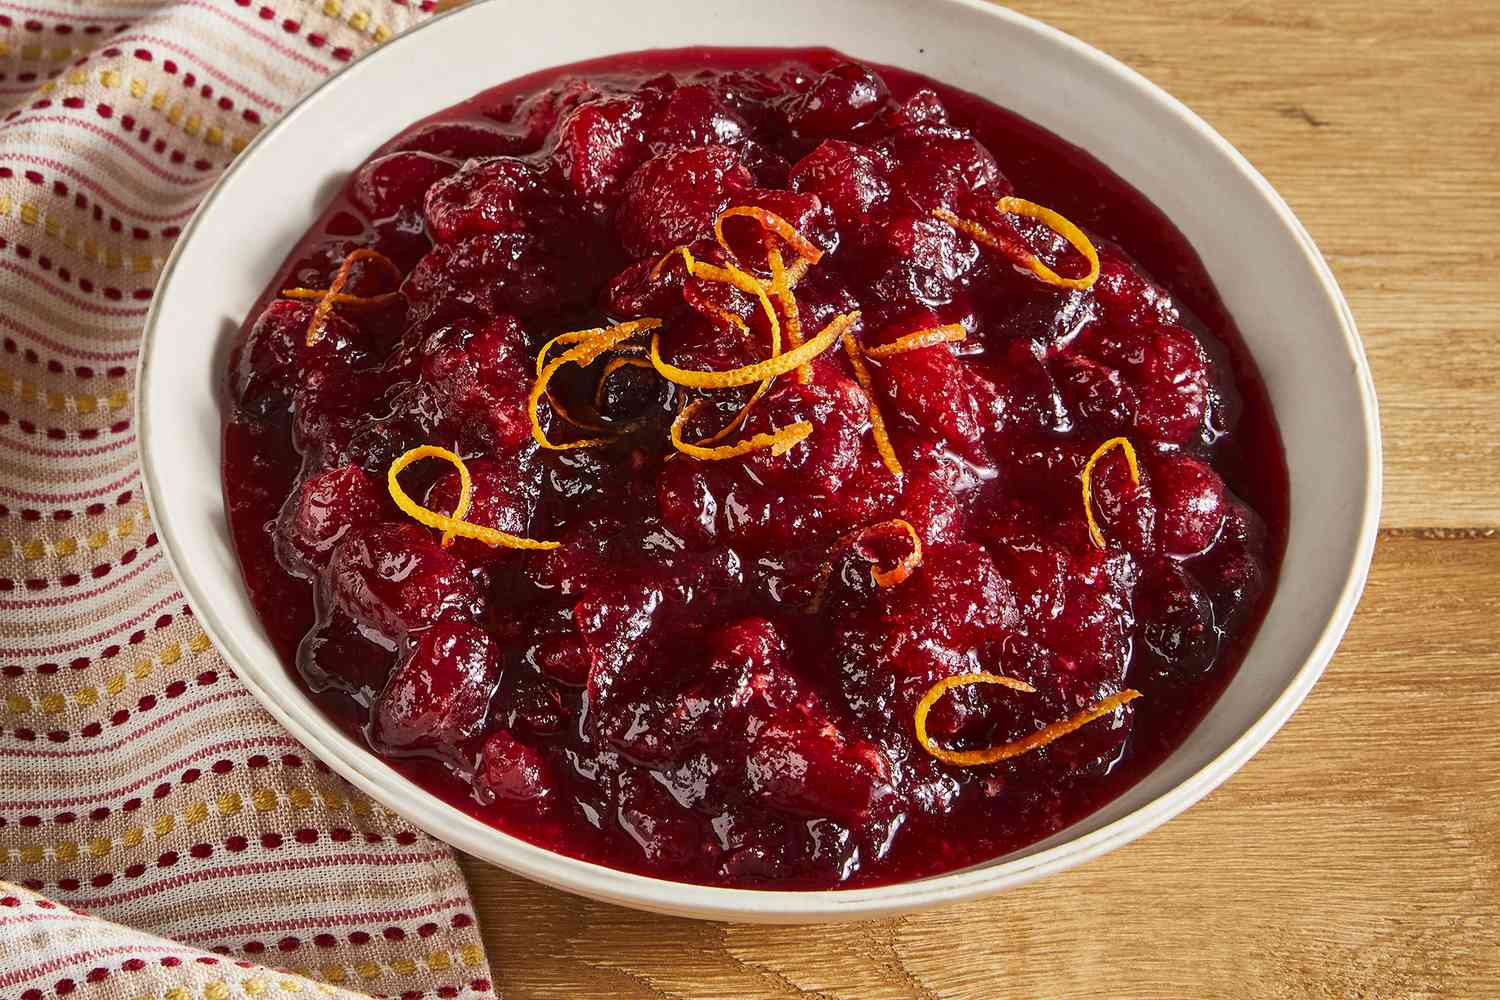 a close up view of a bowl of cranberry sauce topped with fresh orange garnish